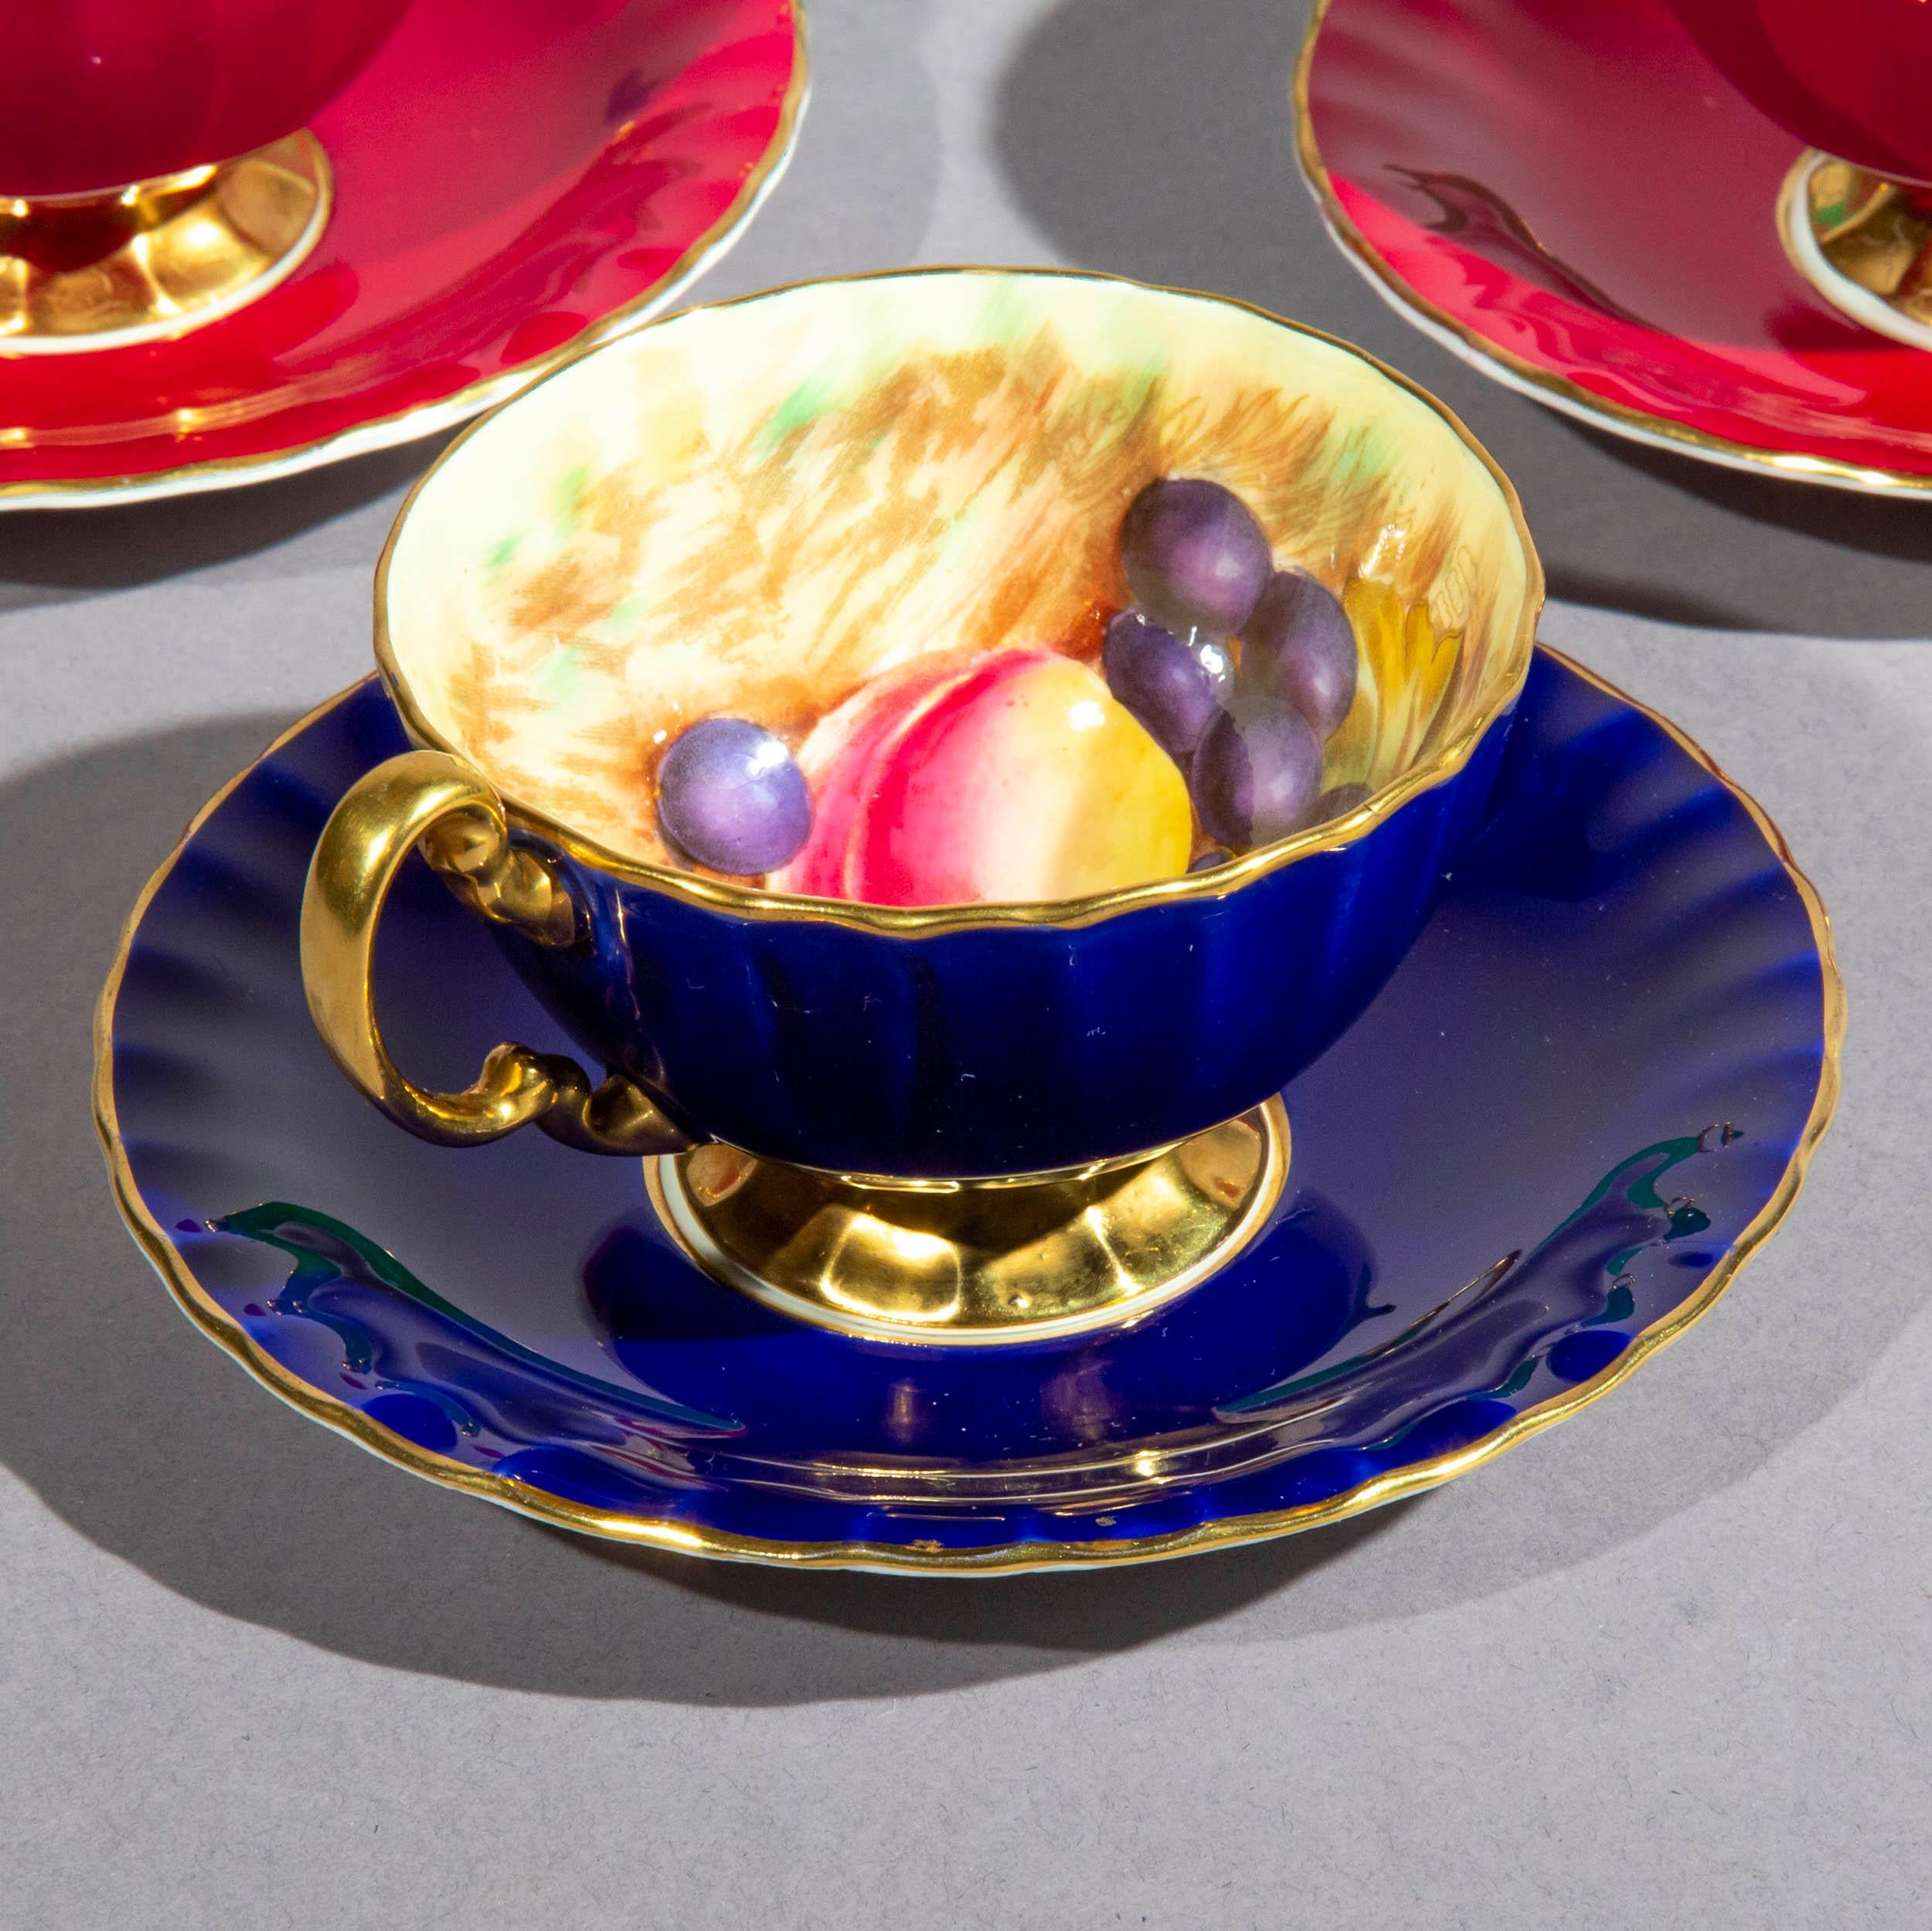 A fabulously decorative harlequin set of eleven vintage Aynsley porcelain tea cups and saucers, in multicoloured glazes, hand-decorated and signed by the artists JA Bailey and D Jones.
England, circa 1950

Variously glazed in cobalt blue (1),